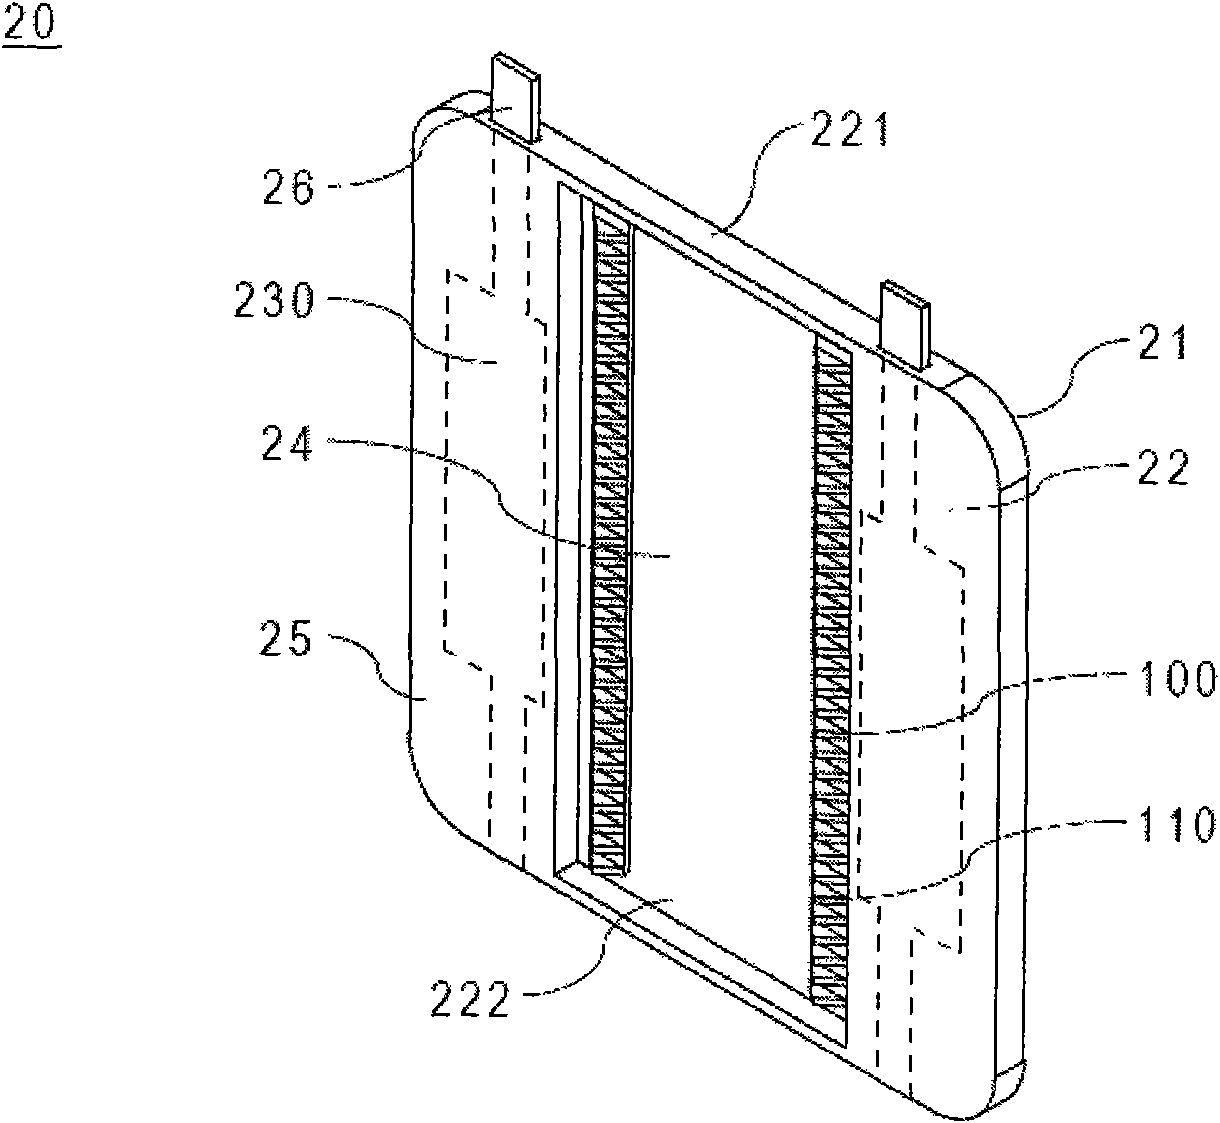 Front opening unified pod with elliptical latch structure